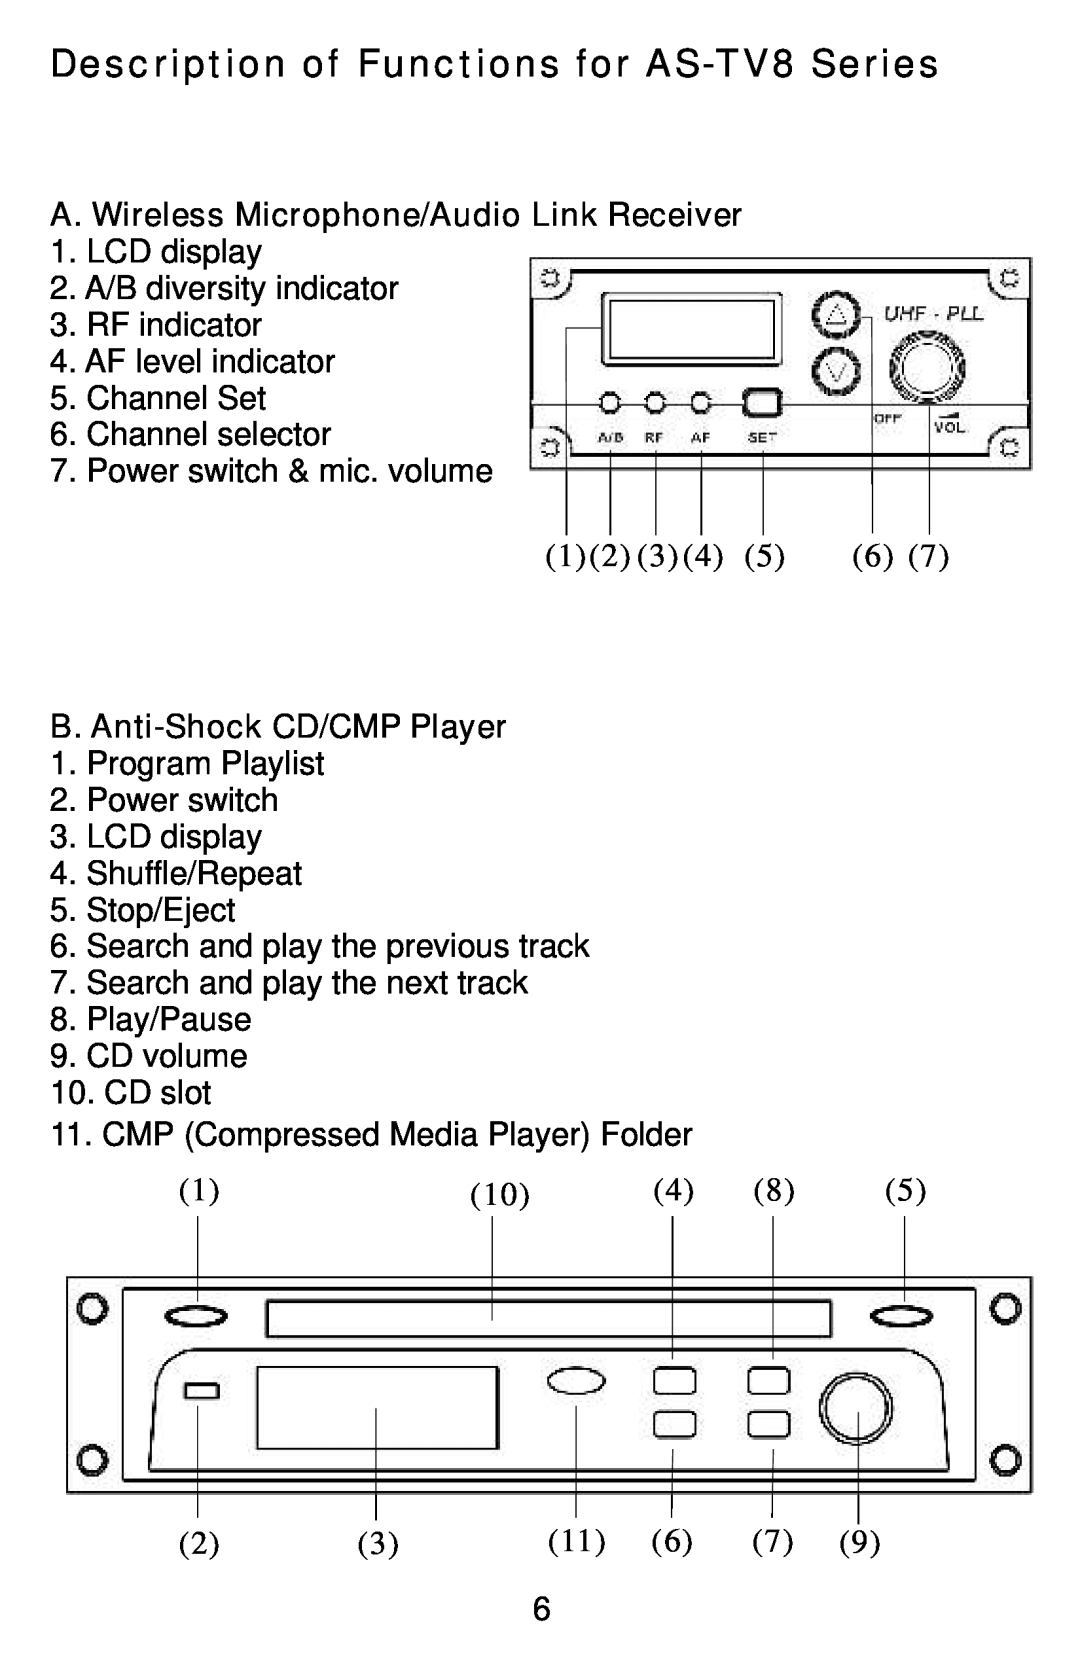 Traveler manual Description of Functions for AS-TV8Series, A. Wireless Microphone/Audio Link Receiver 